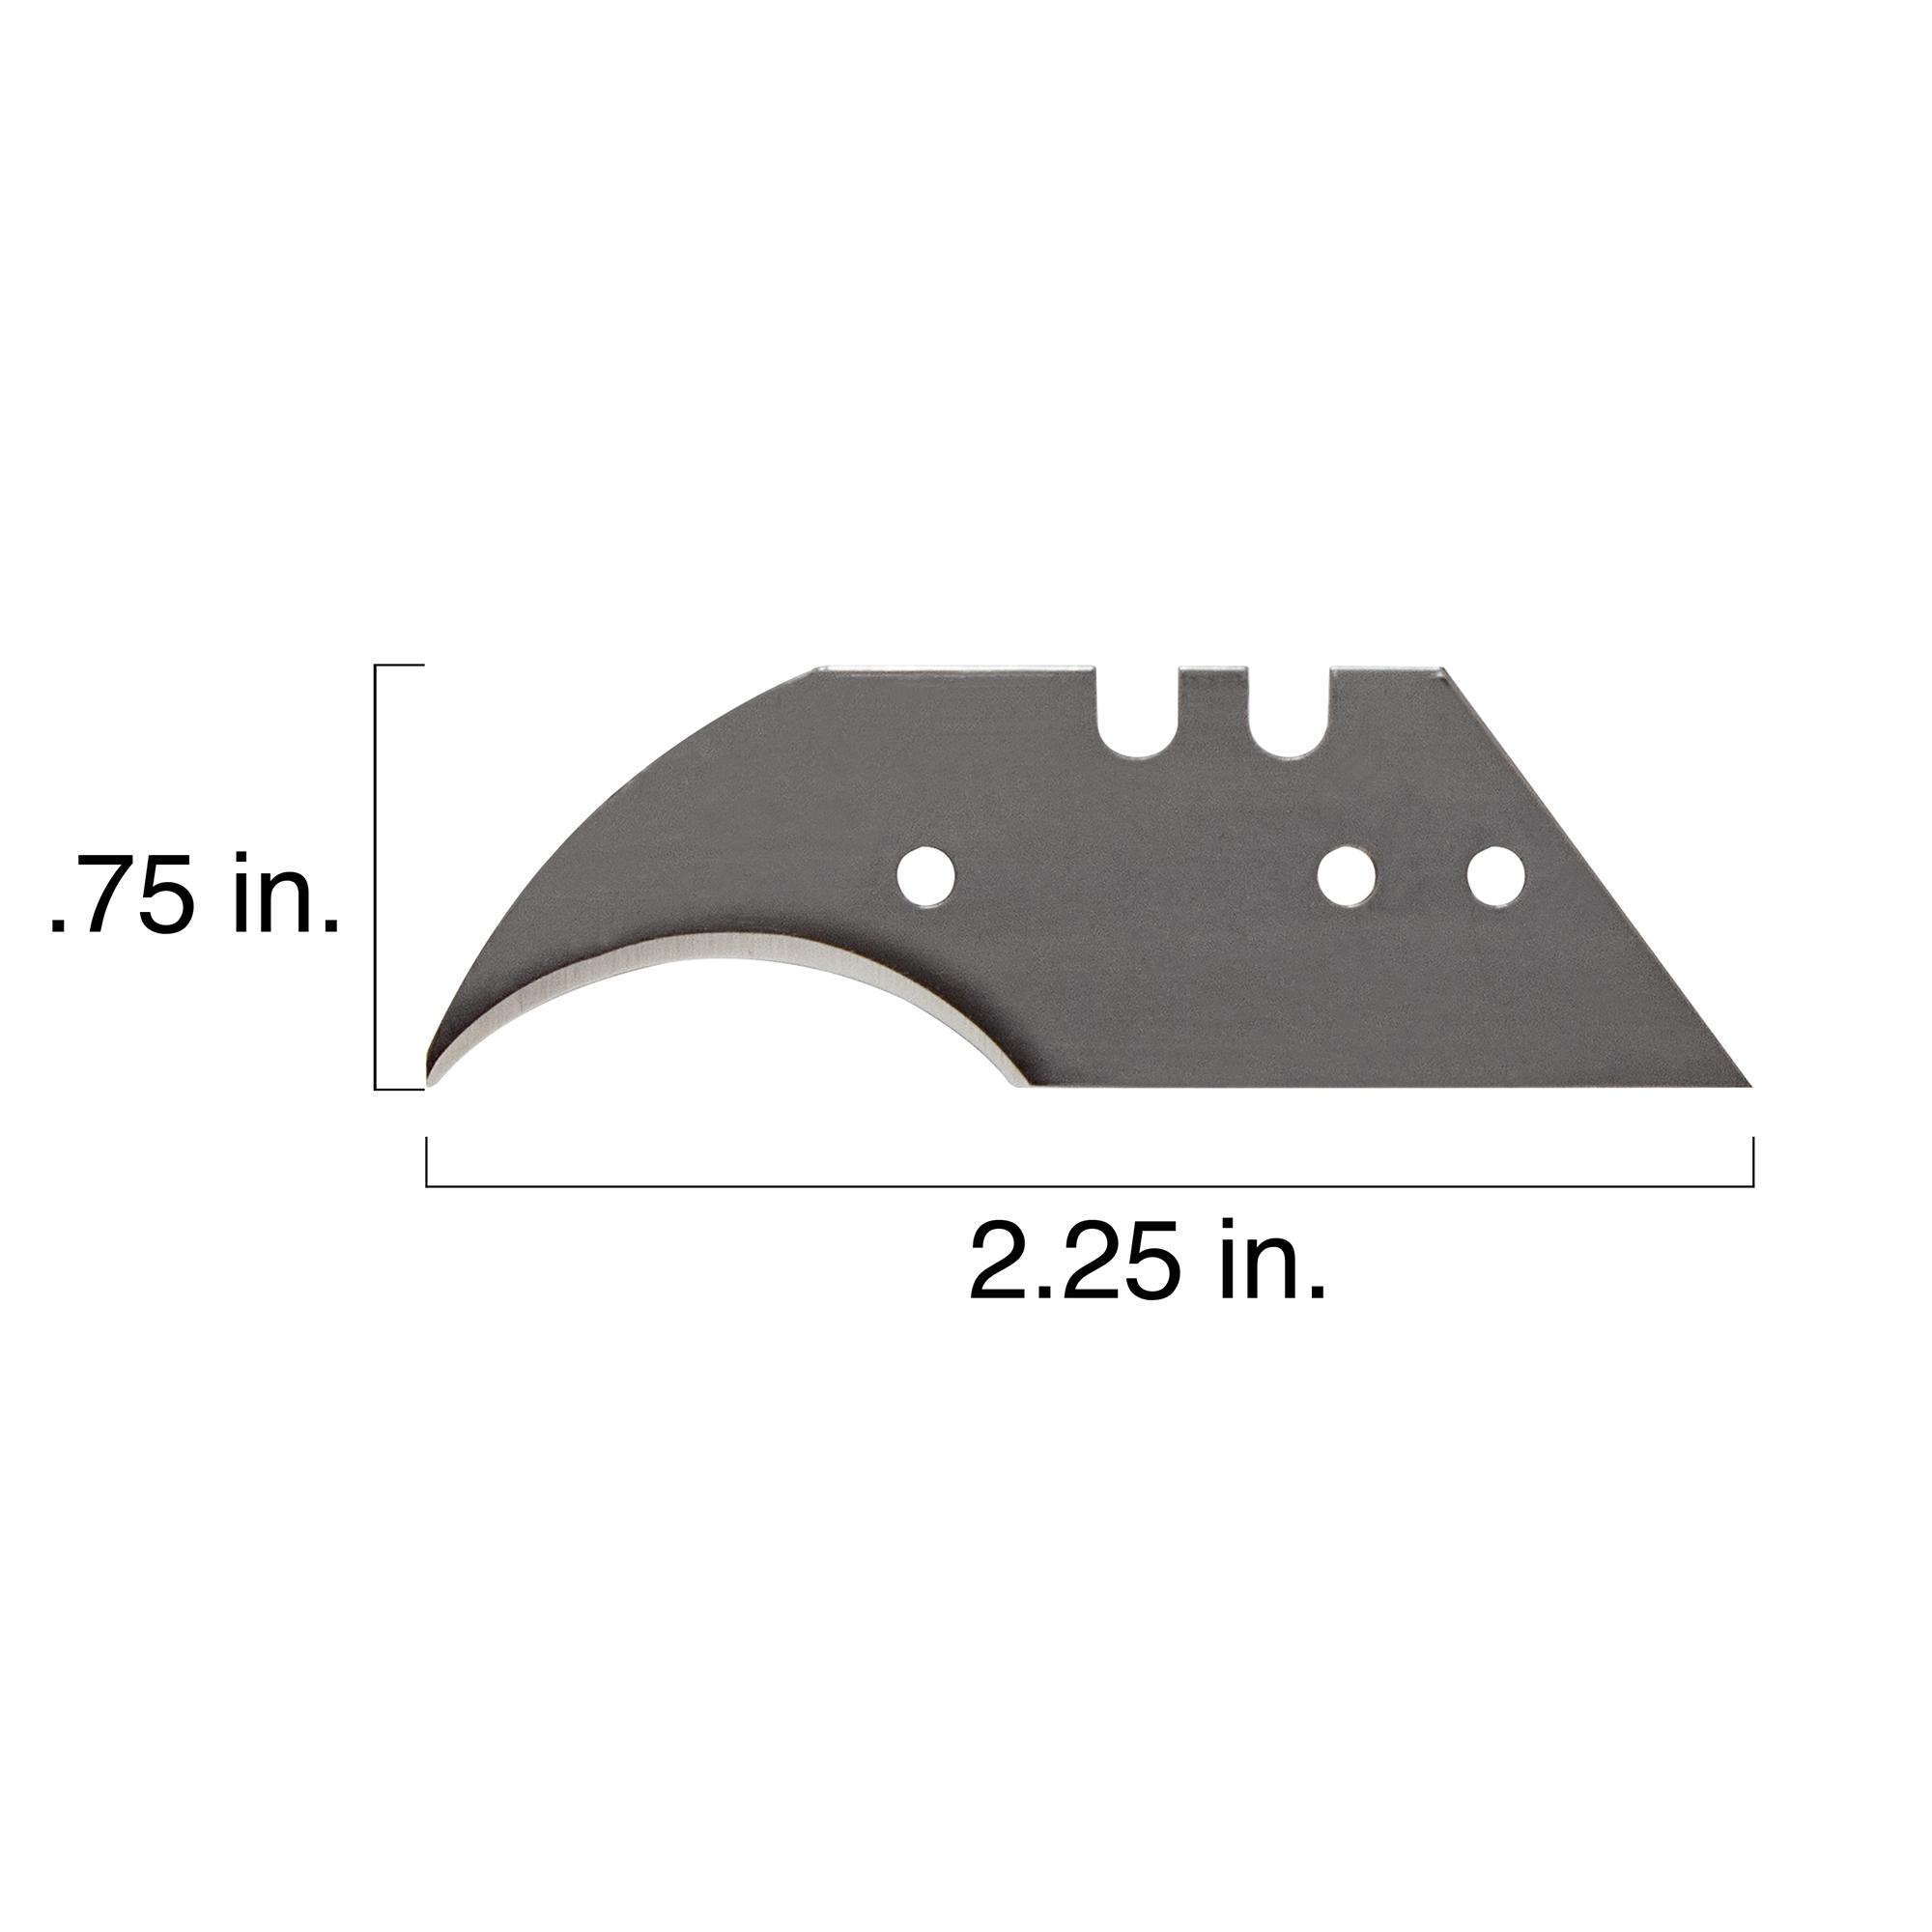 Hawk Concave Blade for Utility Knives